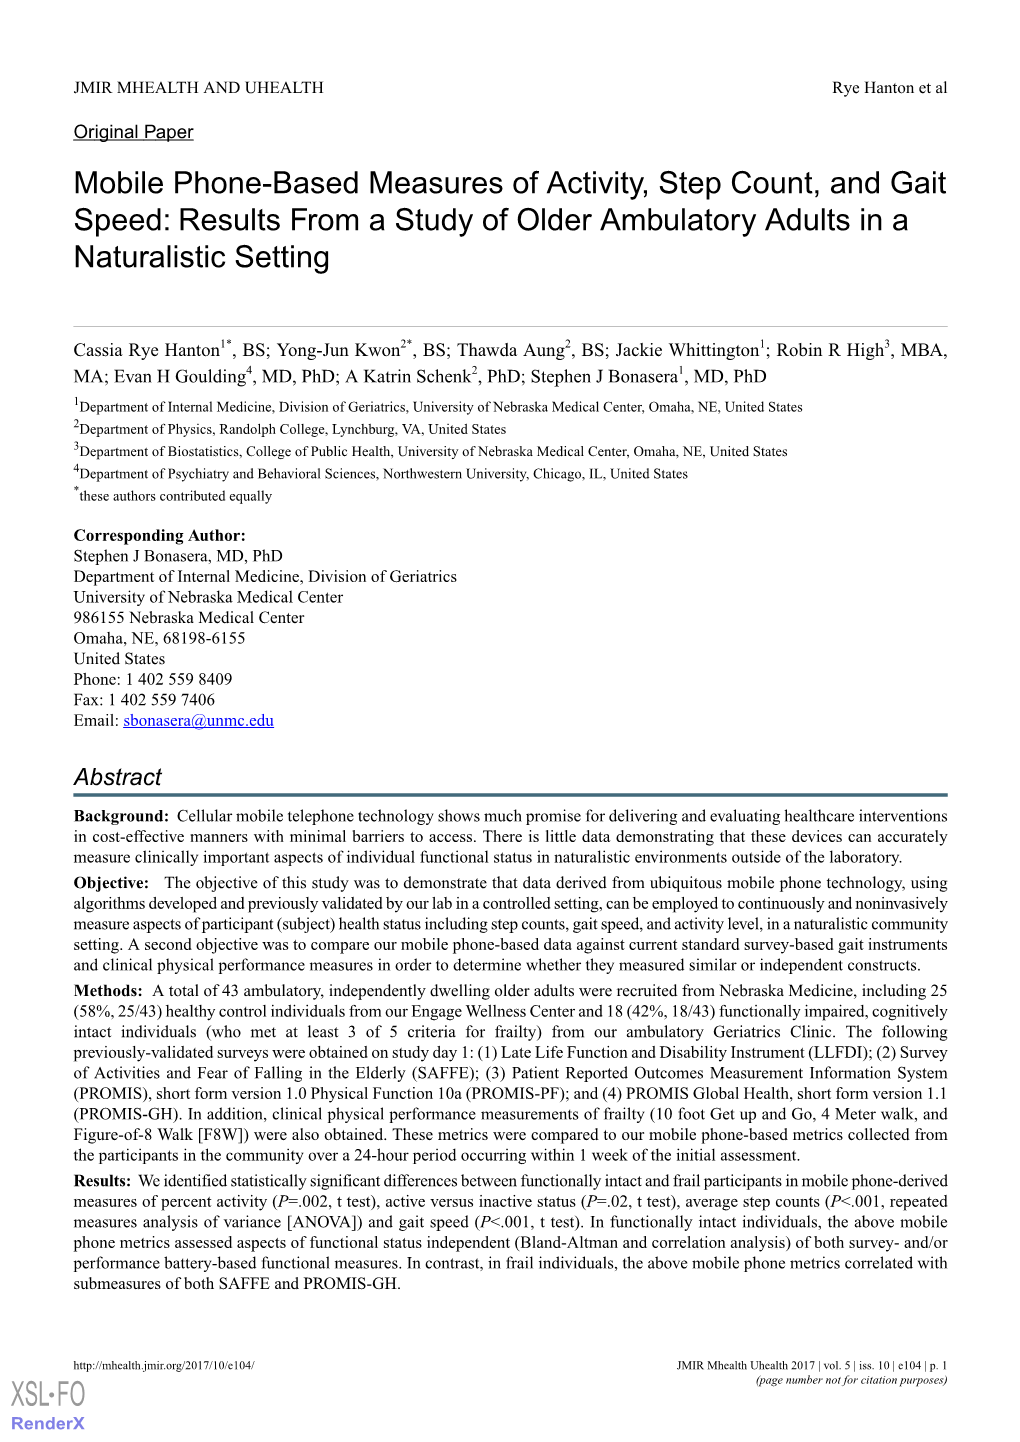 Mobile Phone-Based Measures of Activity, Step Count, and Gait Speed: Results from a Study of Older Ambulatory Adults in a Naturalistic Setting